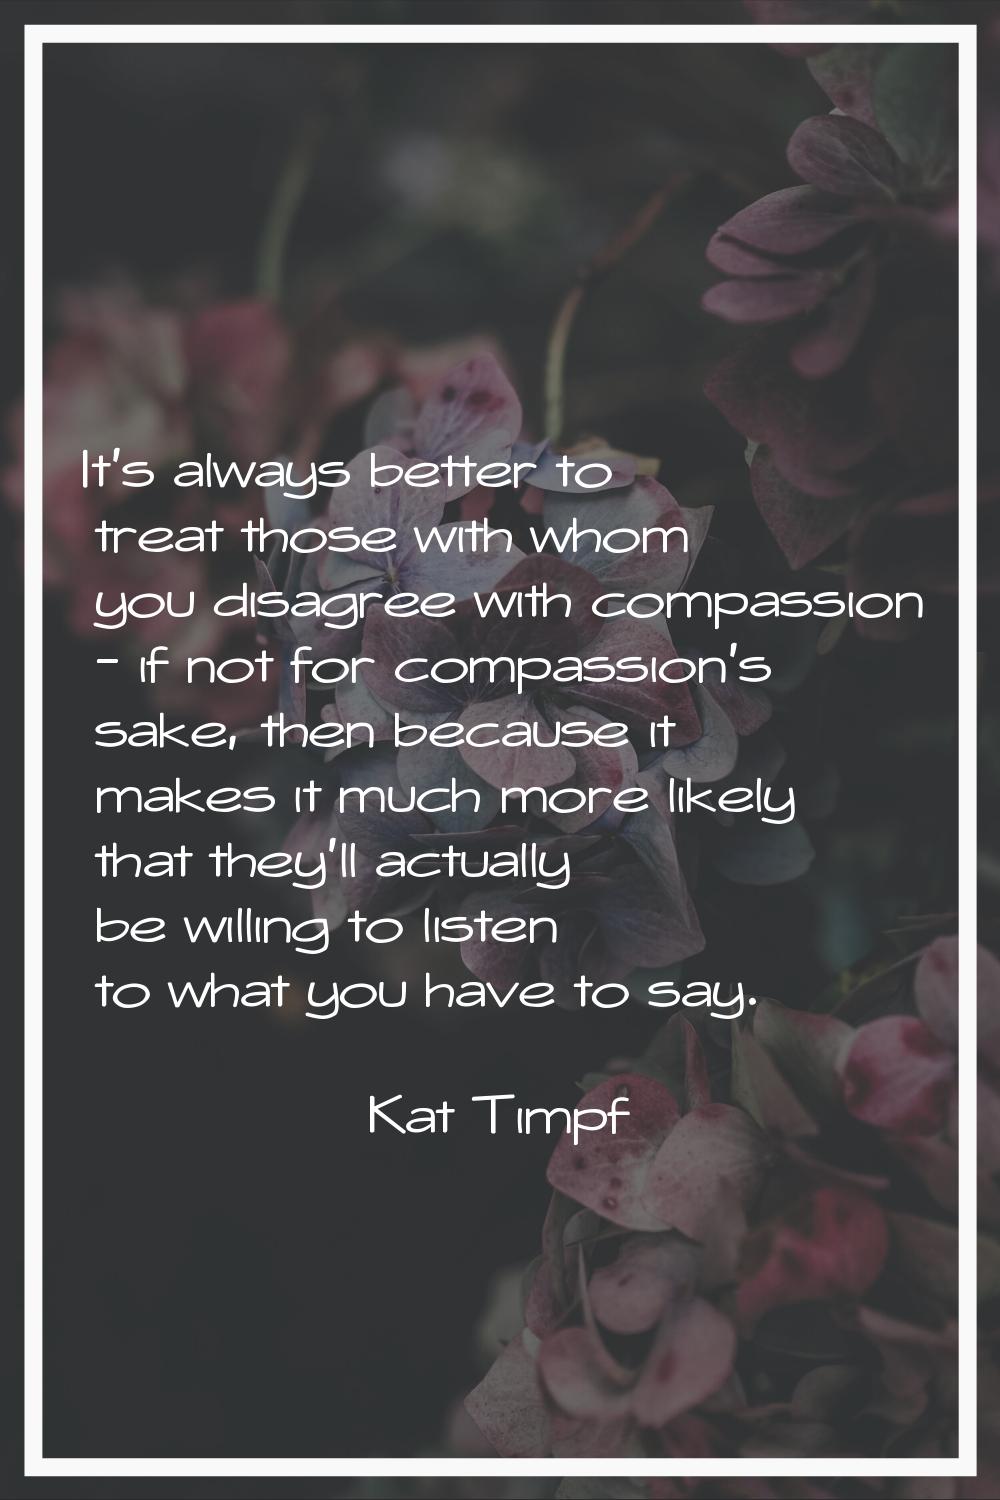 It's always better to treat those with whom you disagree with compassion - if not for compassion's 